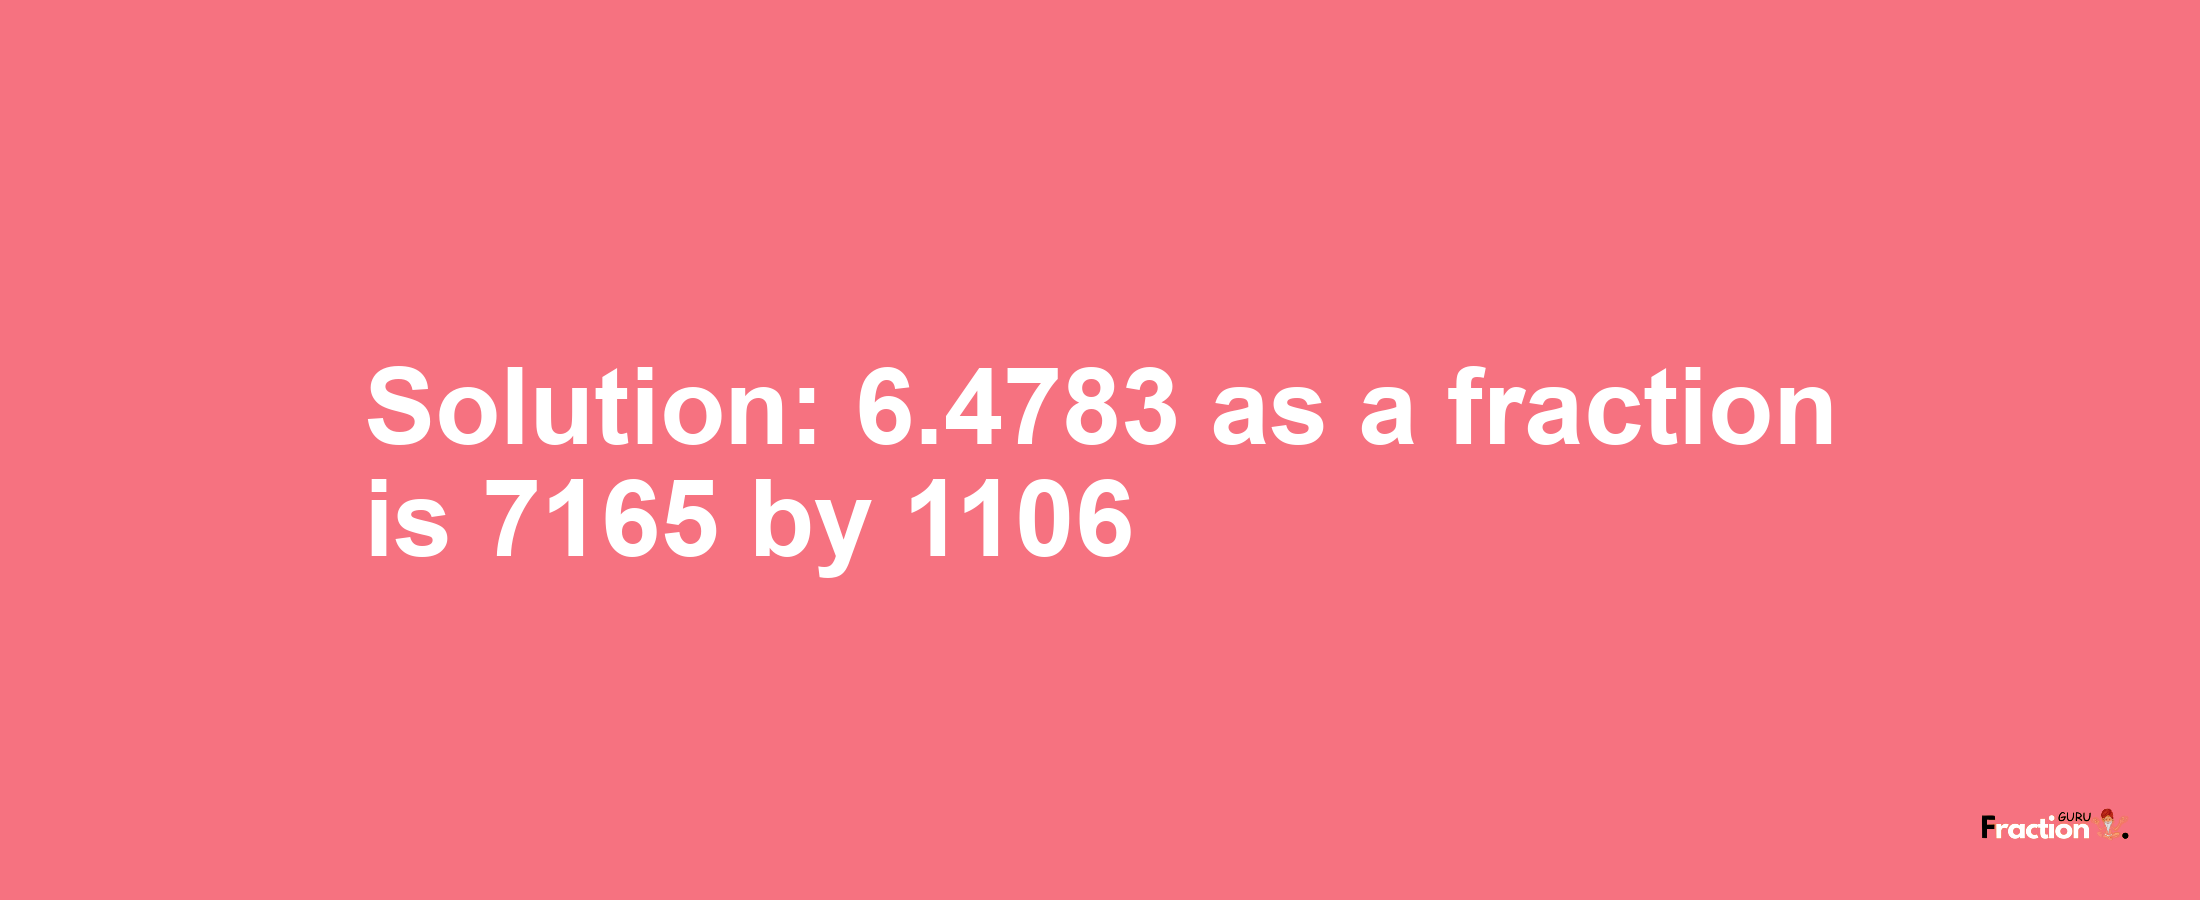 Solution:6.4783 as a fraction is 7165/1106